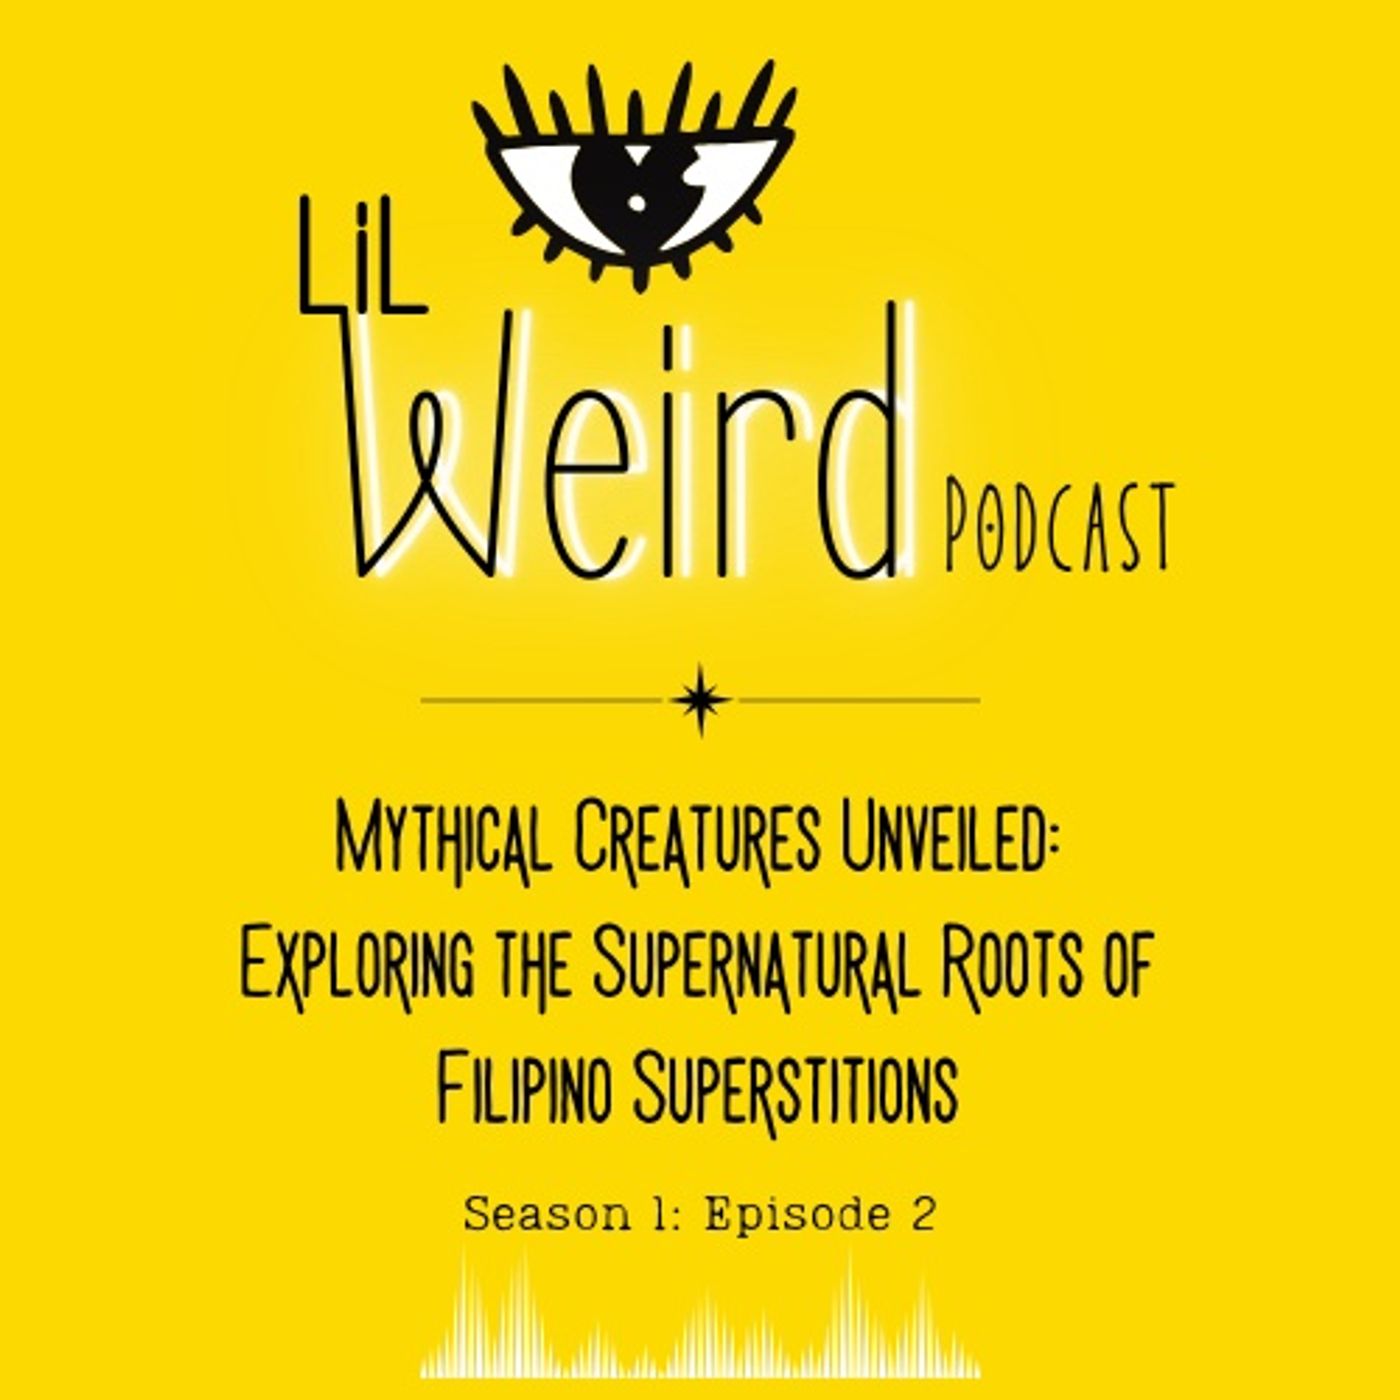 Mythical Creatures Unveiled: Exploring the Supernatural Roots of Filipino Superstitions